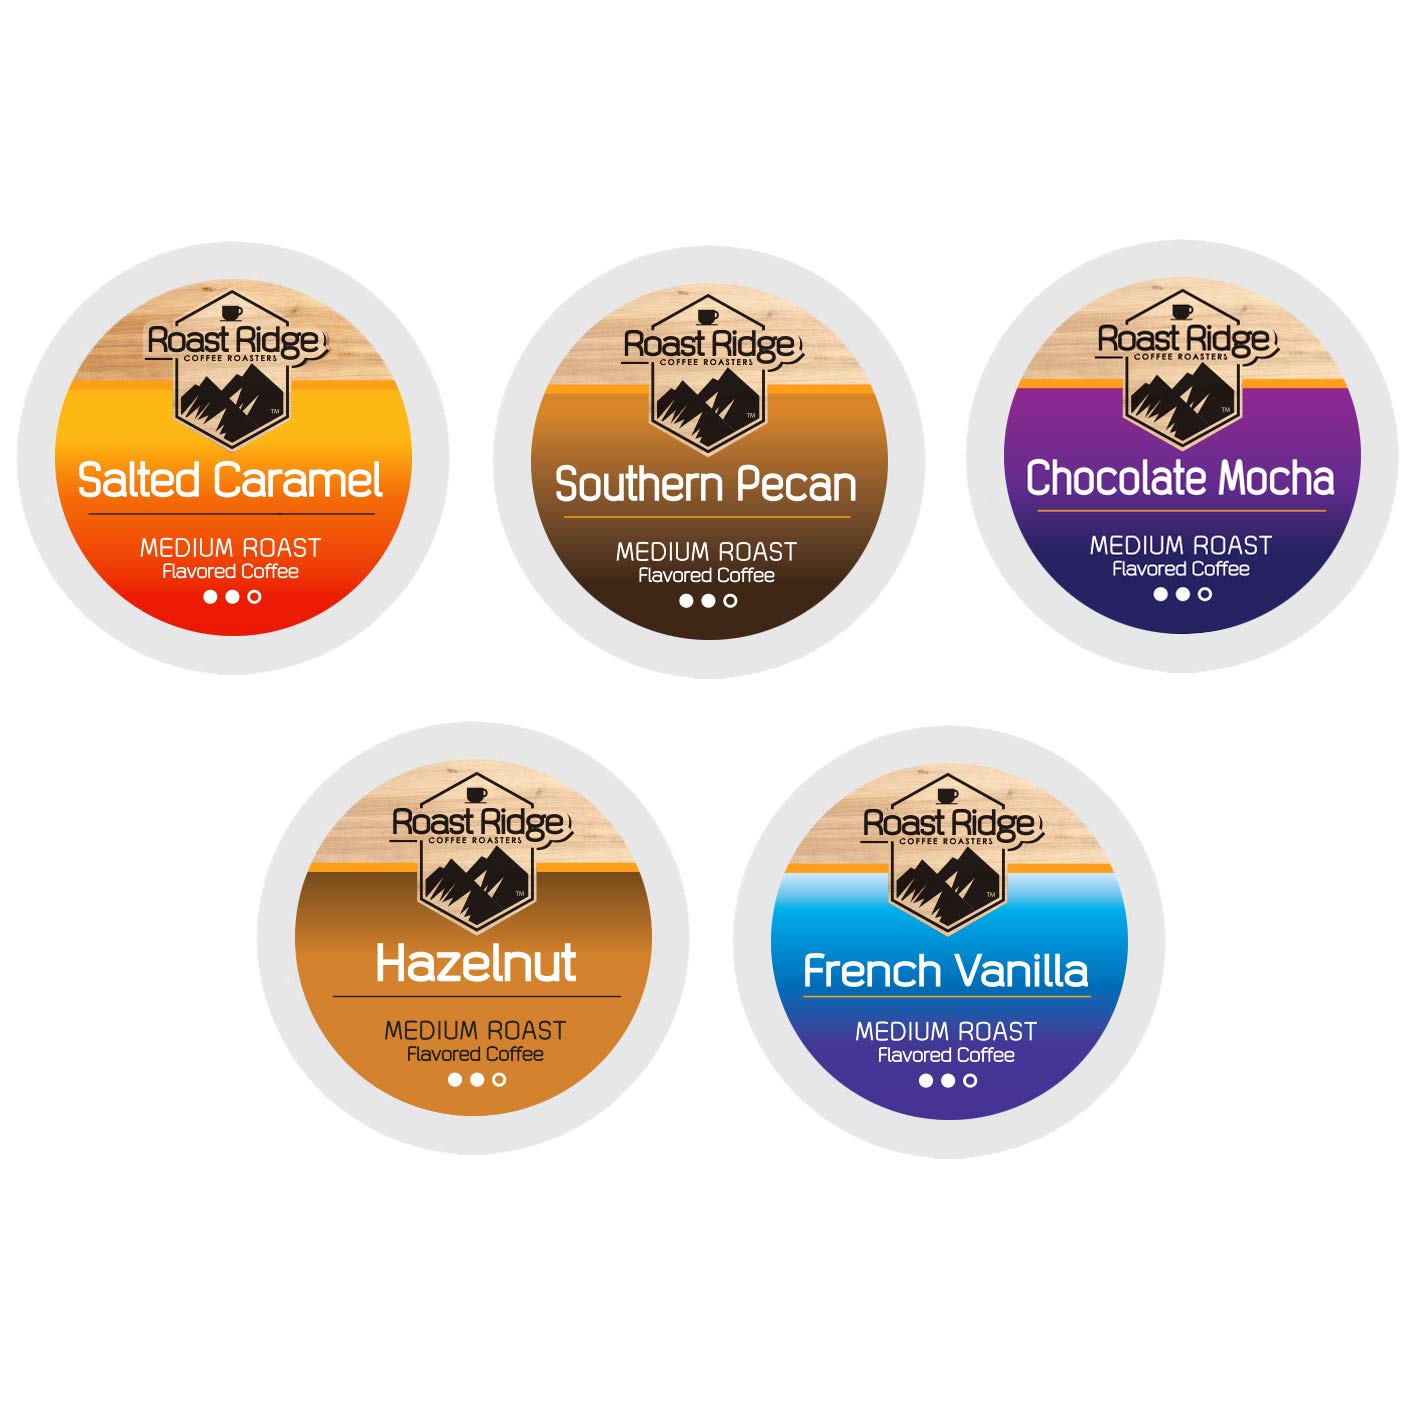 Roast Ridge Single Serve Coffee Pods for Keurig K-Cup Brewers, Variety Pack, 100 Count (20 each: Salted Caramel, Southern Pecan, Chocolate Mocha, Hazelnut, French Vanilla)